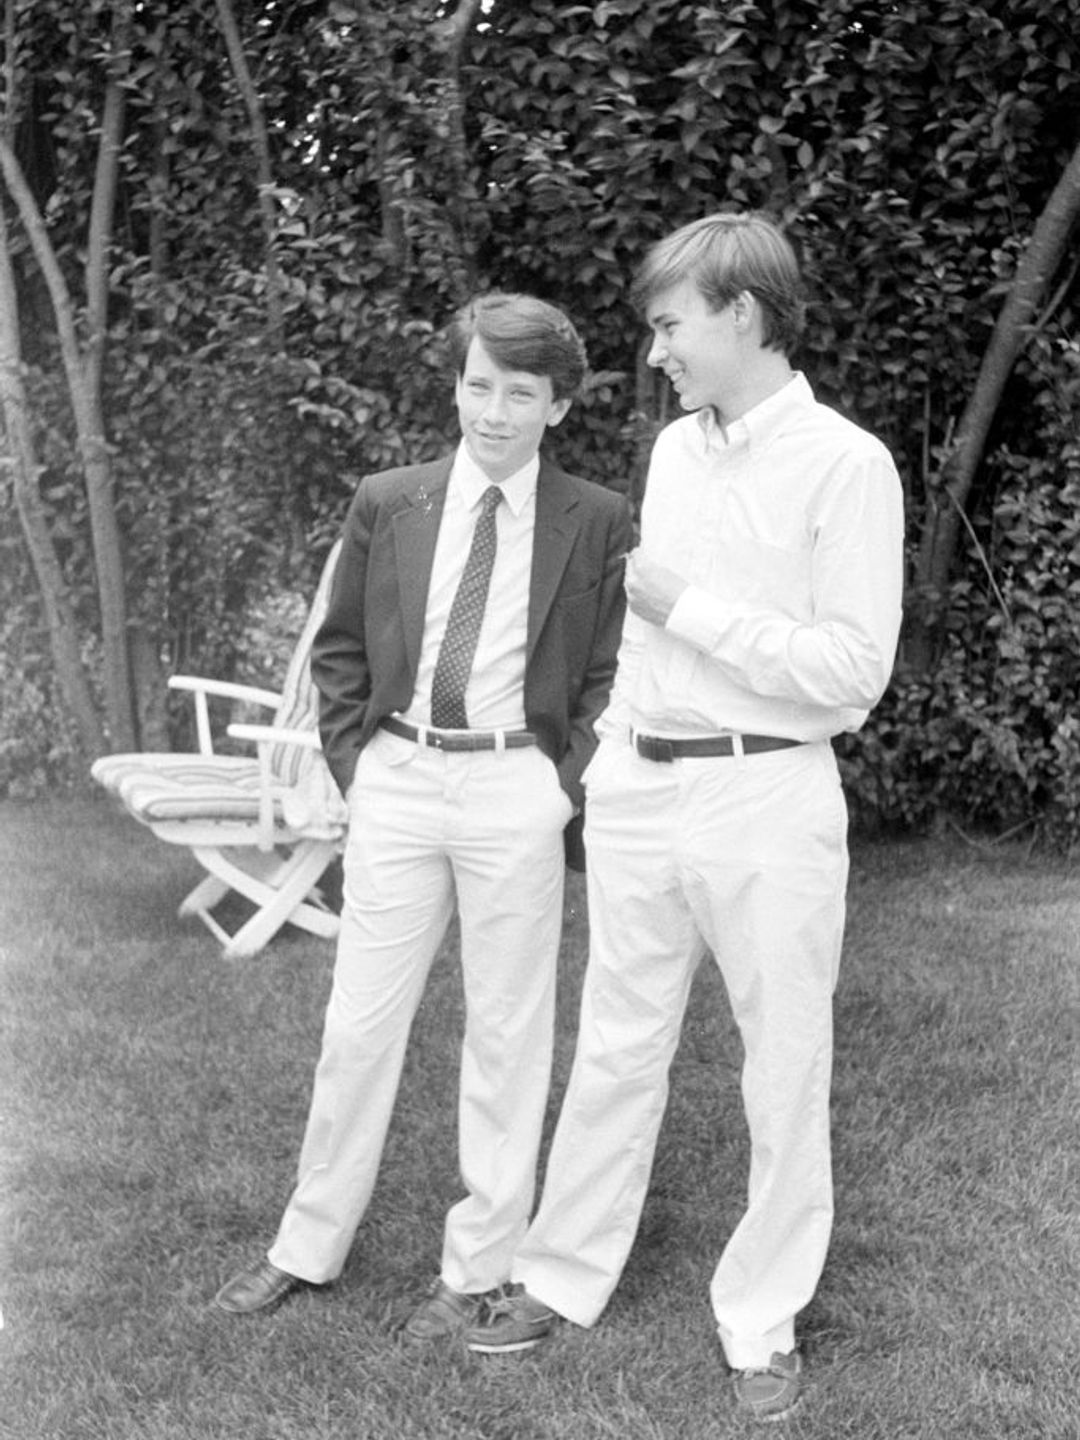 Anderson and Carter Cooper standing in a garden